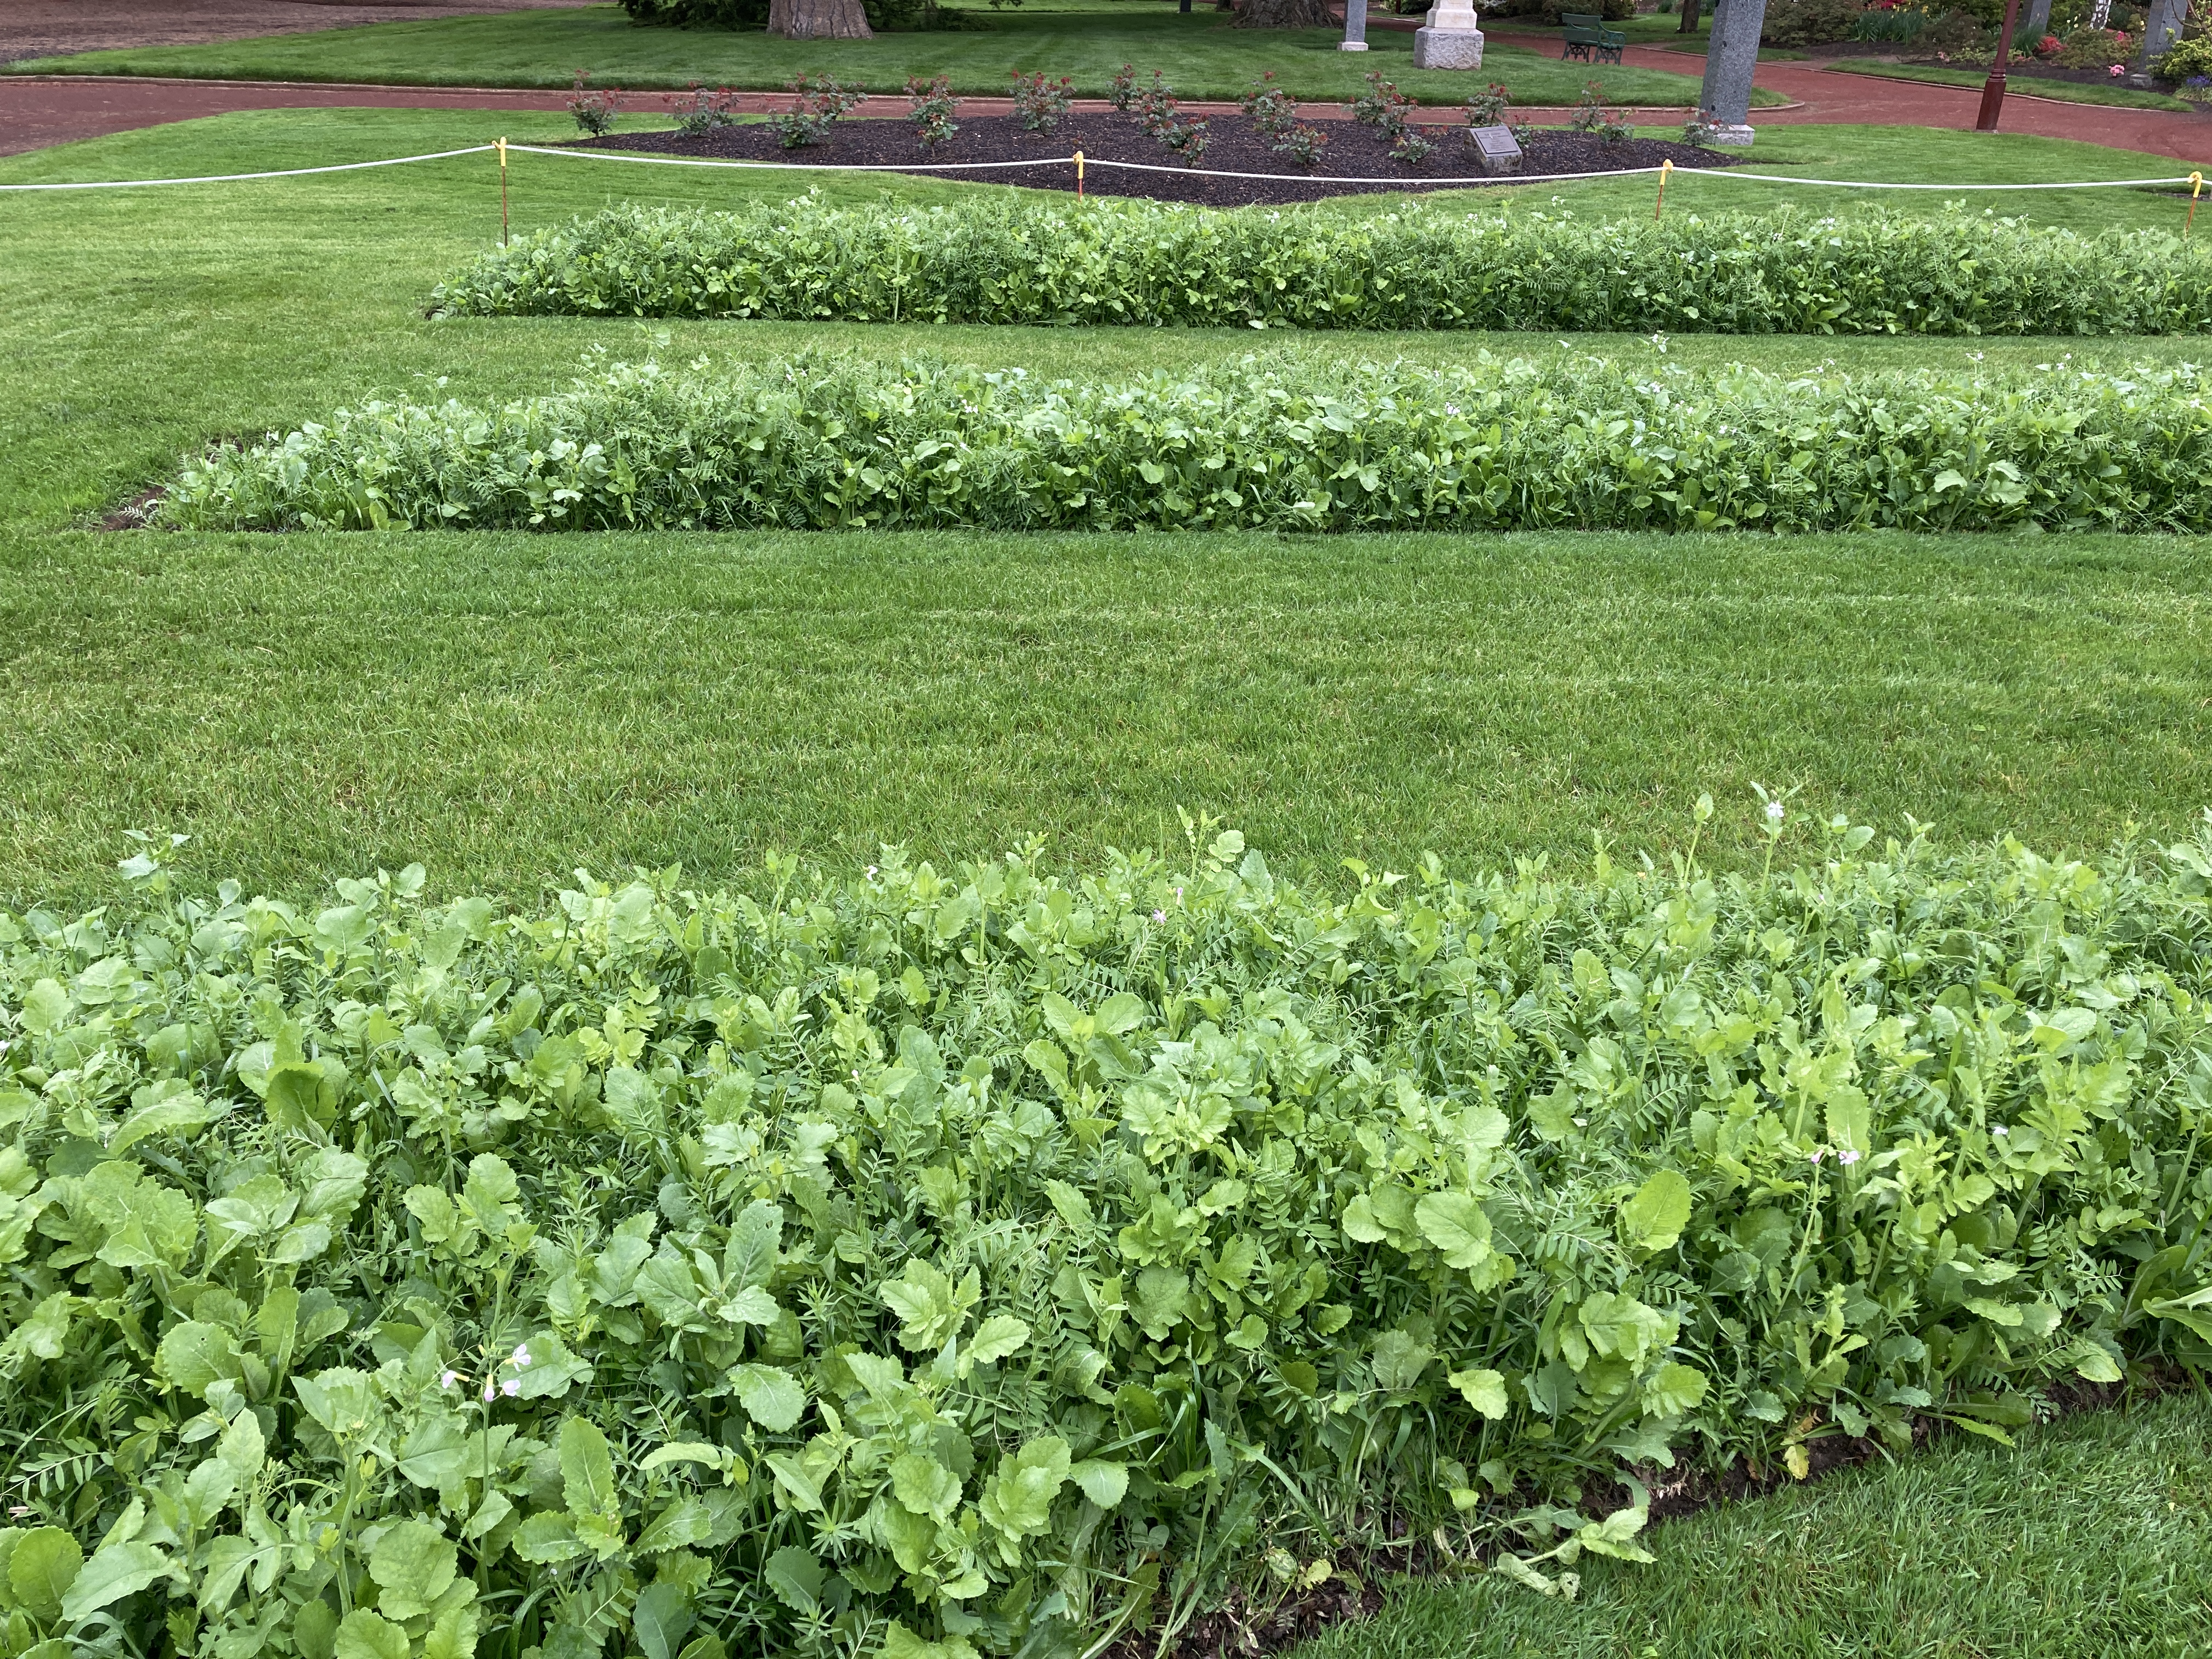 A green manure crop was planted in the dahlia garden beds over winter. In this image, three rectangular garden beds surrounded by lawn are filled with small green plants. 